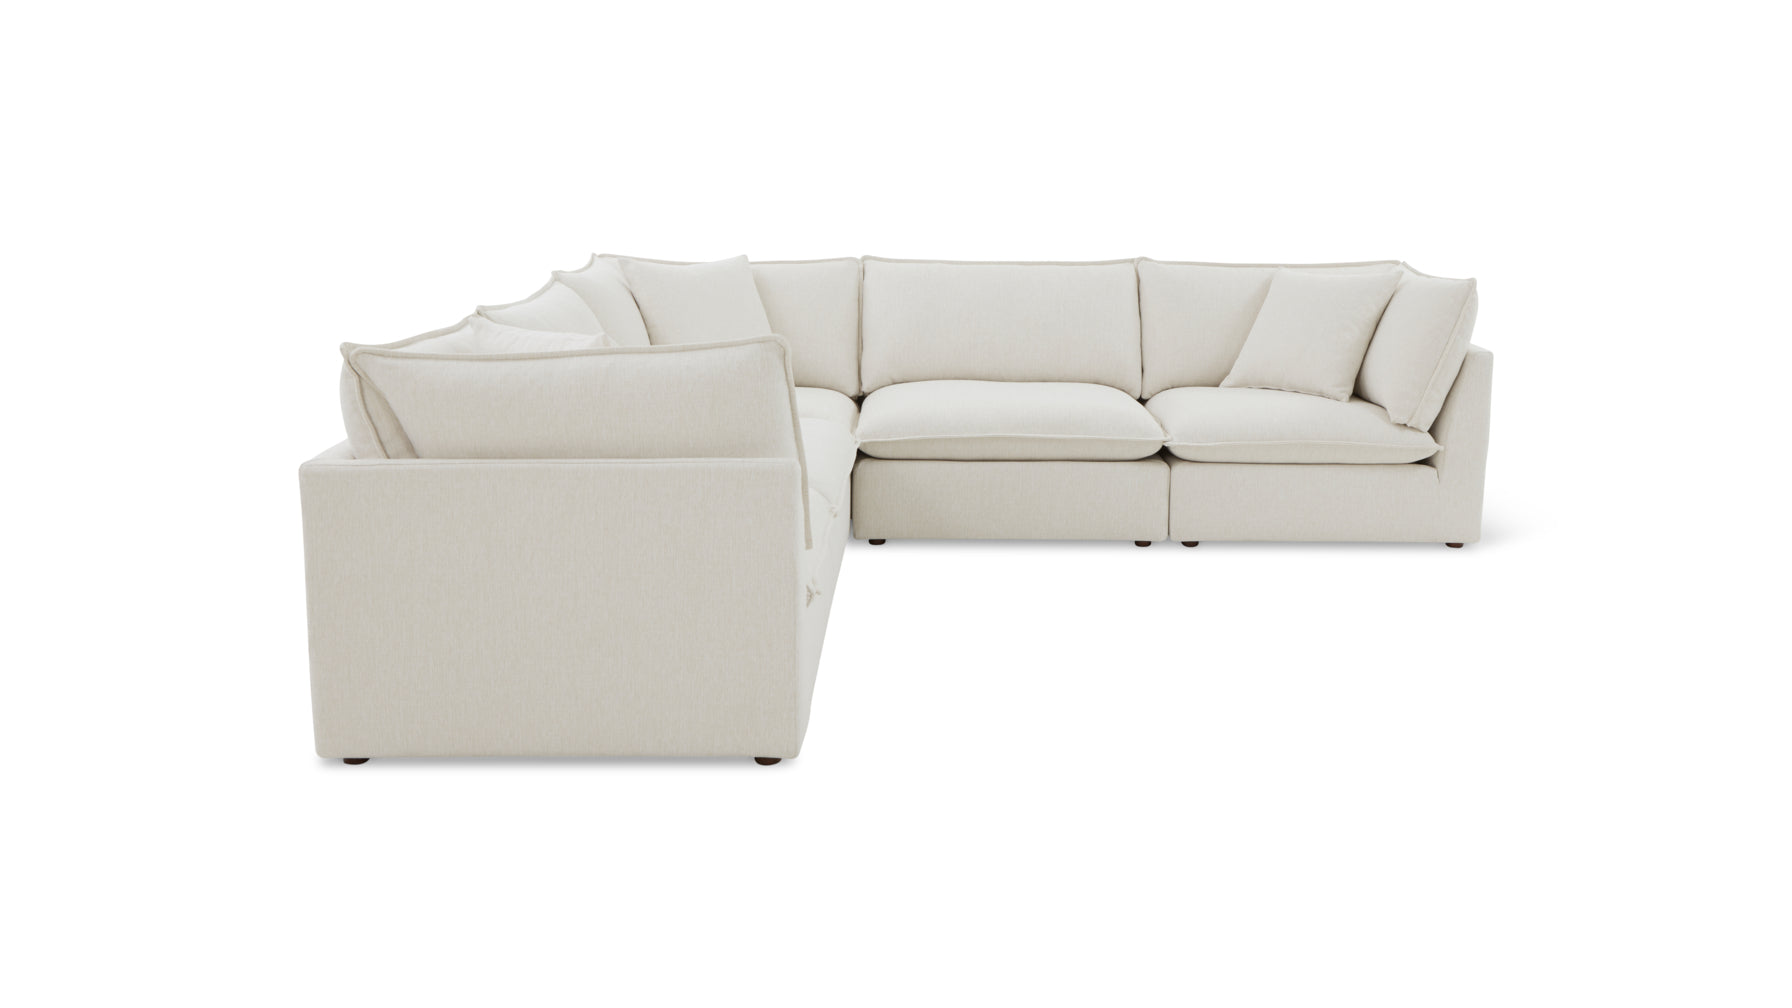 Chill Time 5-Piece Modular Sectional Closed, Birch - Image 6